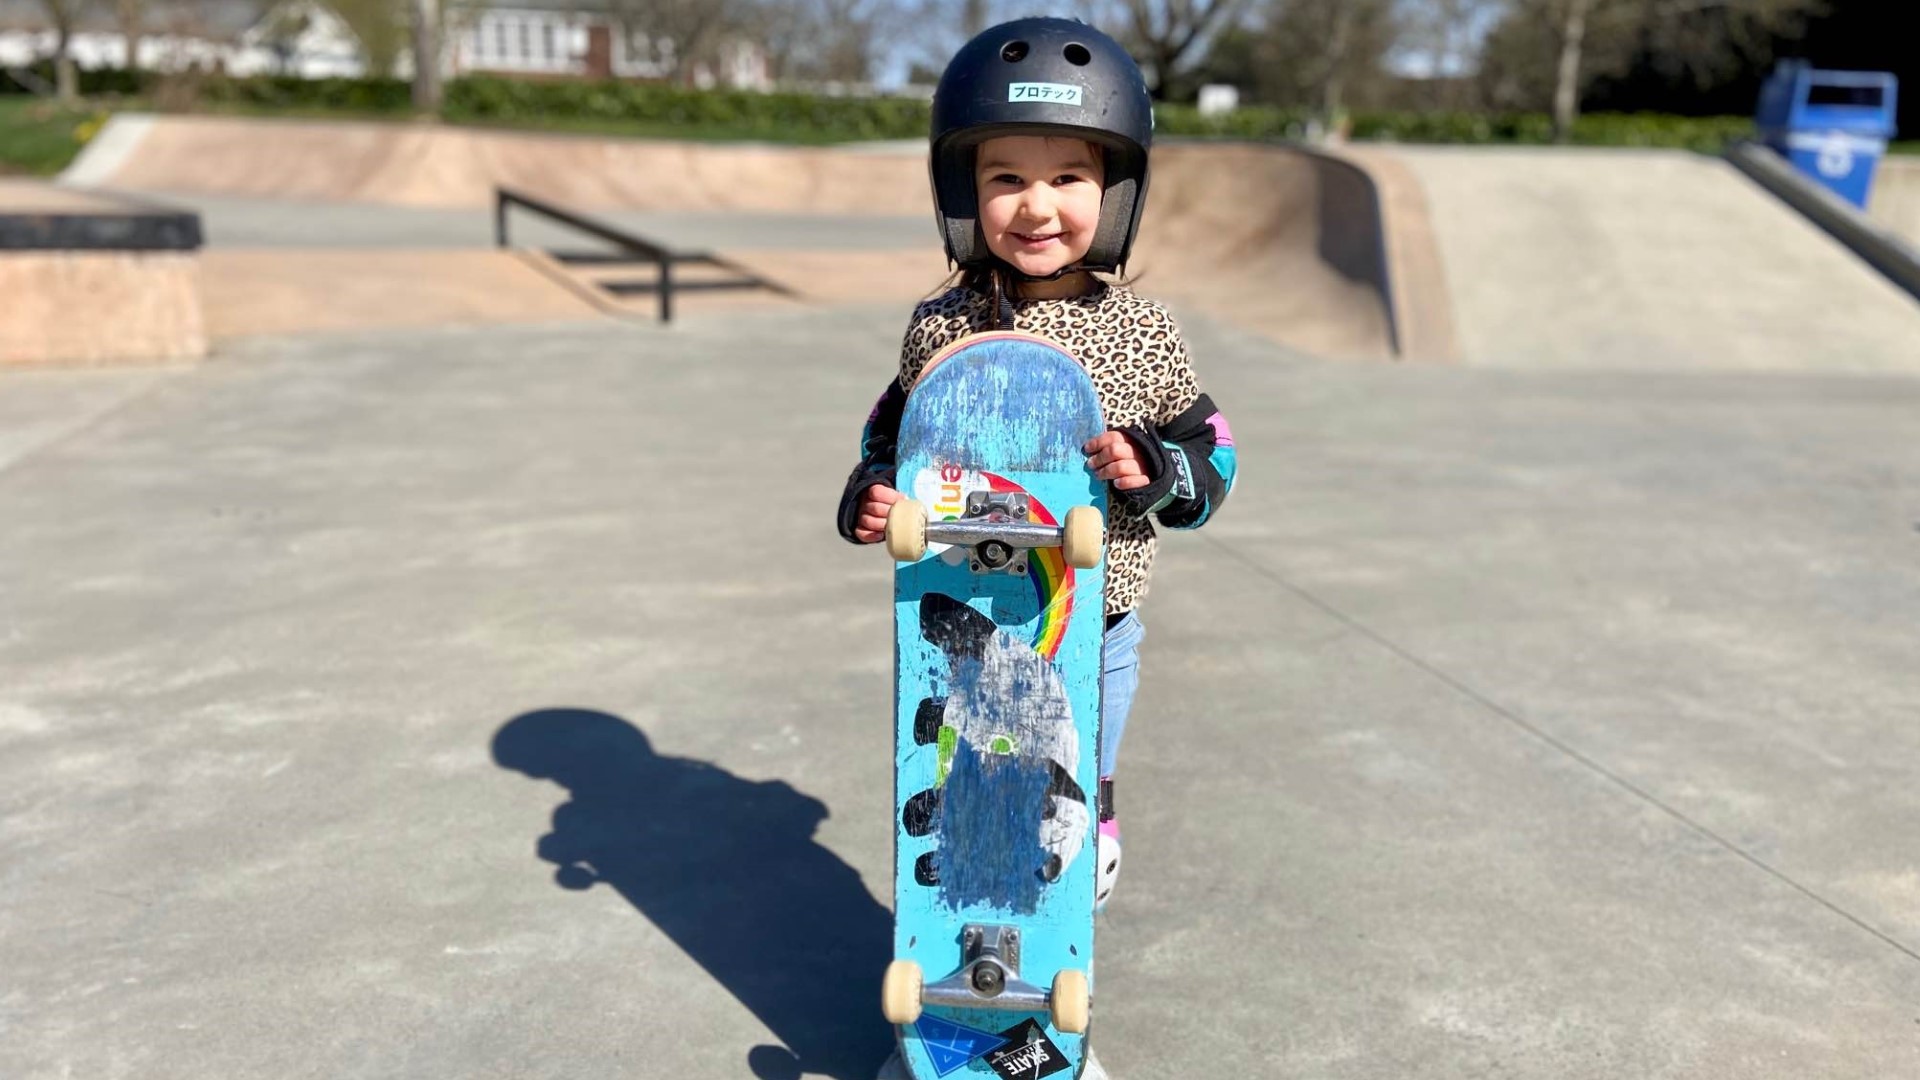 Magnolia Winzen, age 4, has been skating for roughly 1/3 of her life. #k5evening